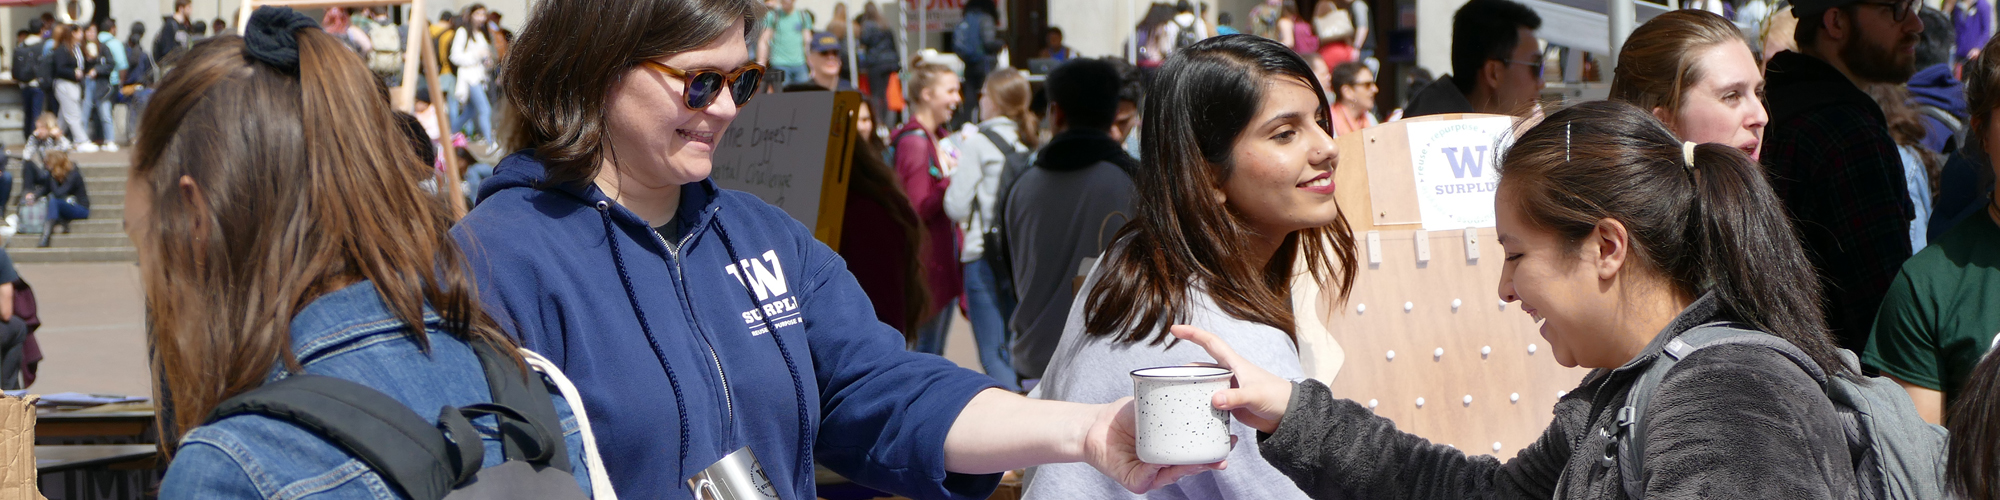 Campus community interacting during UW Earth Day 2018 event on Red Square